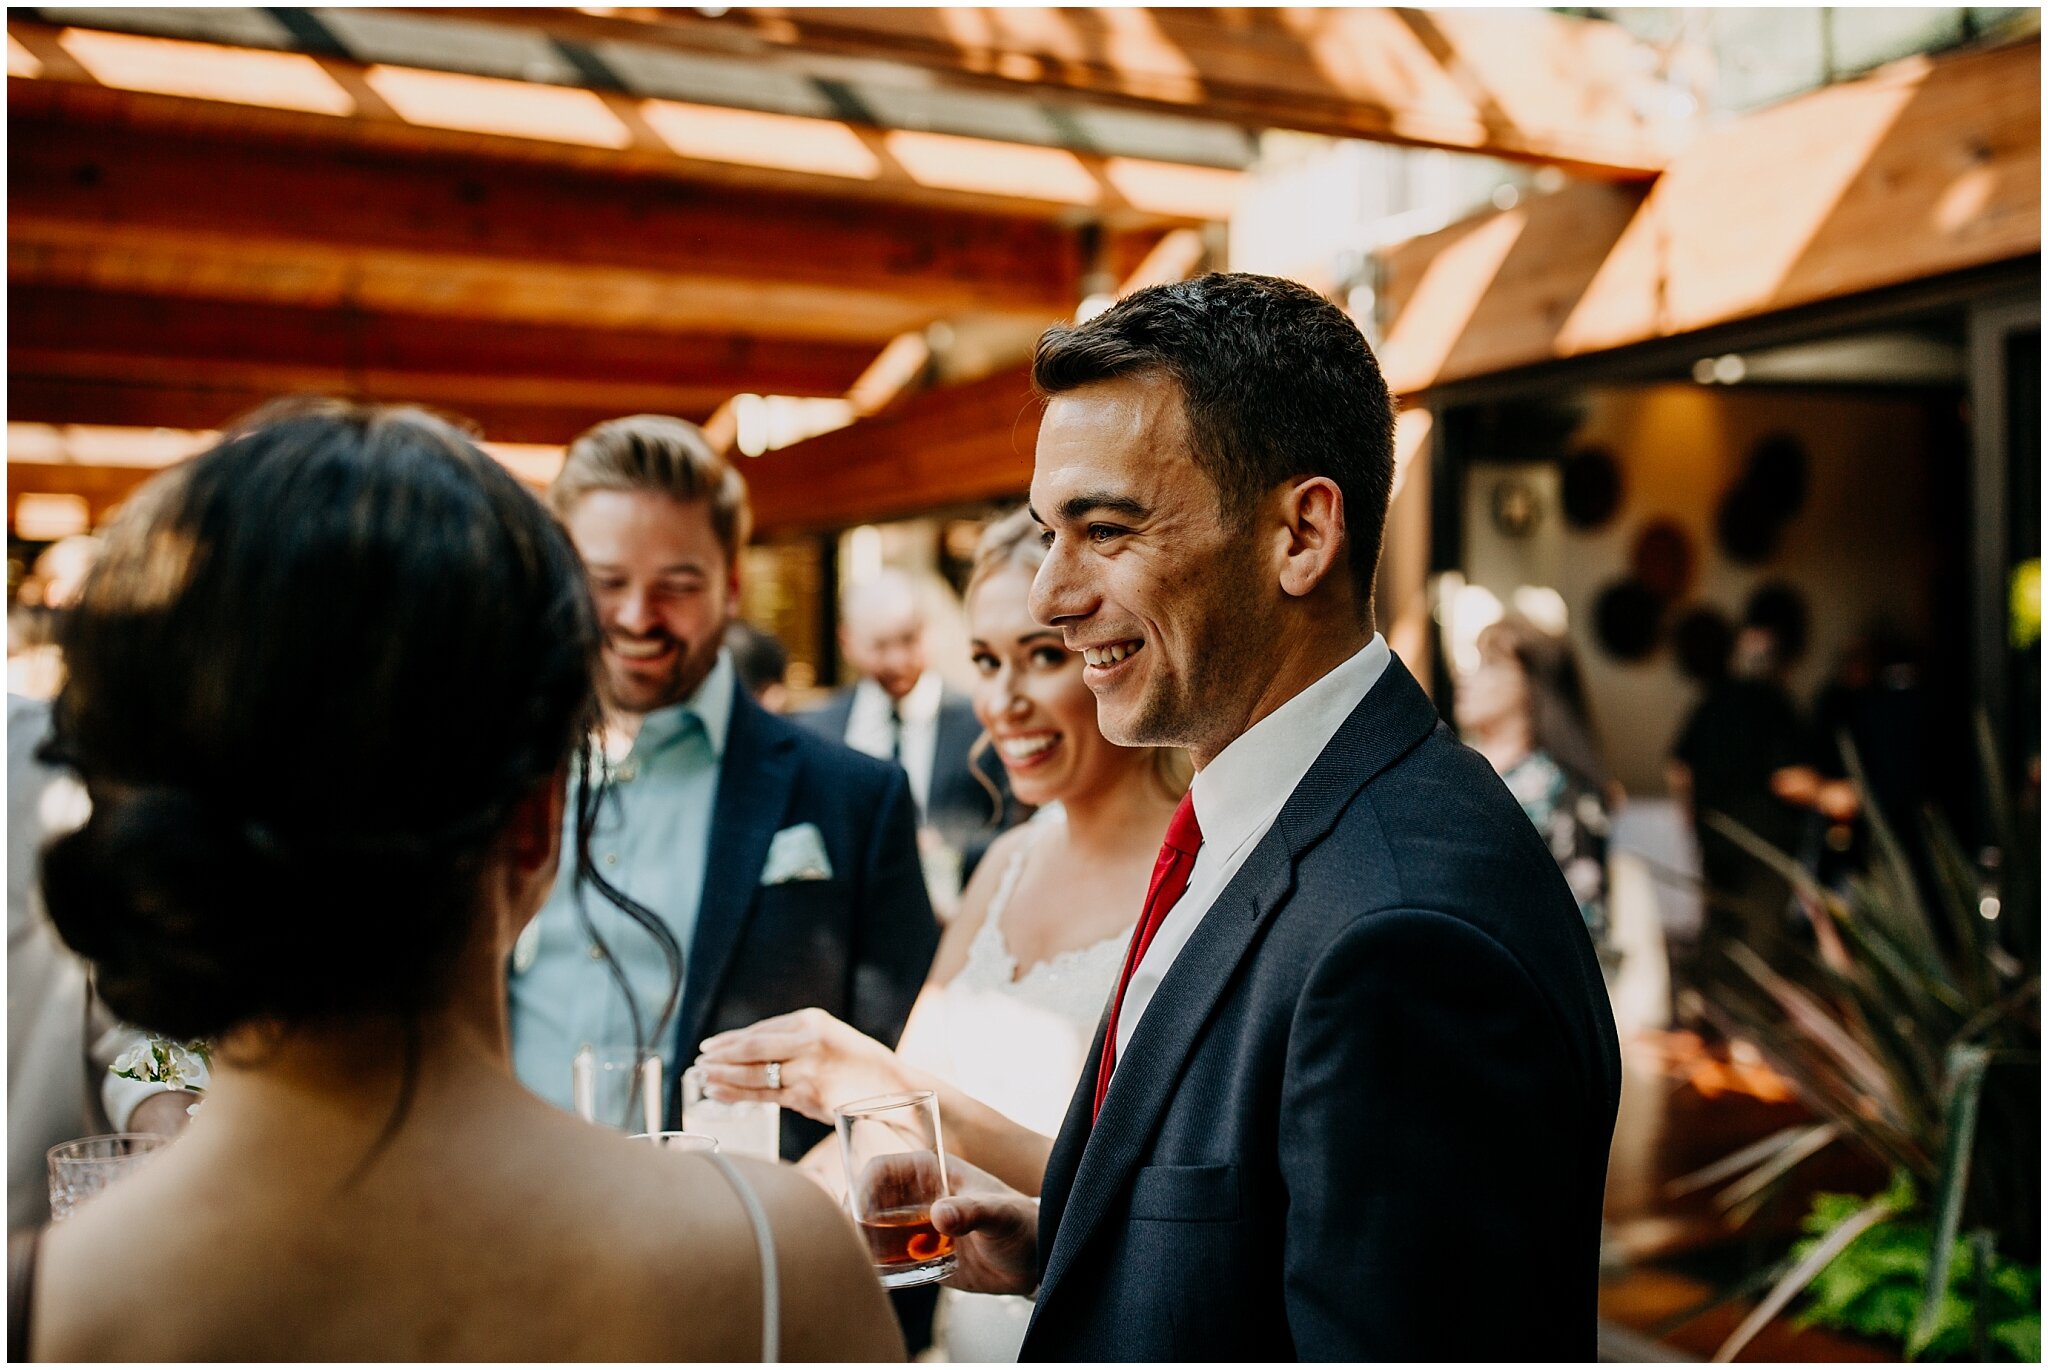 groom mingling with guests during cocktail hour at shaughnessy restaurant wedding